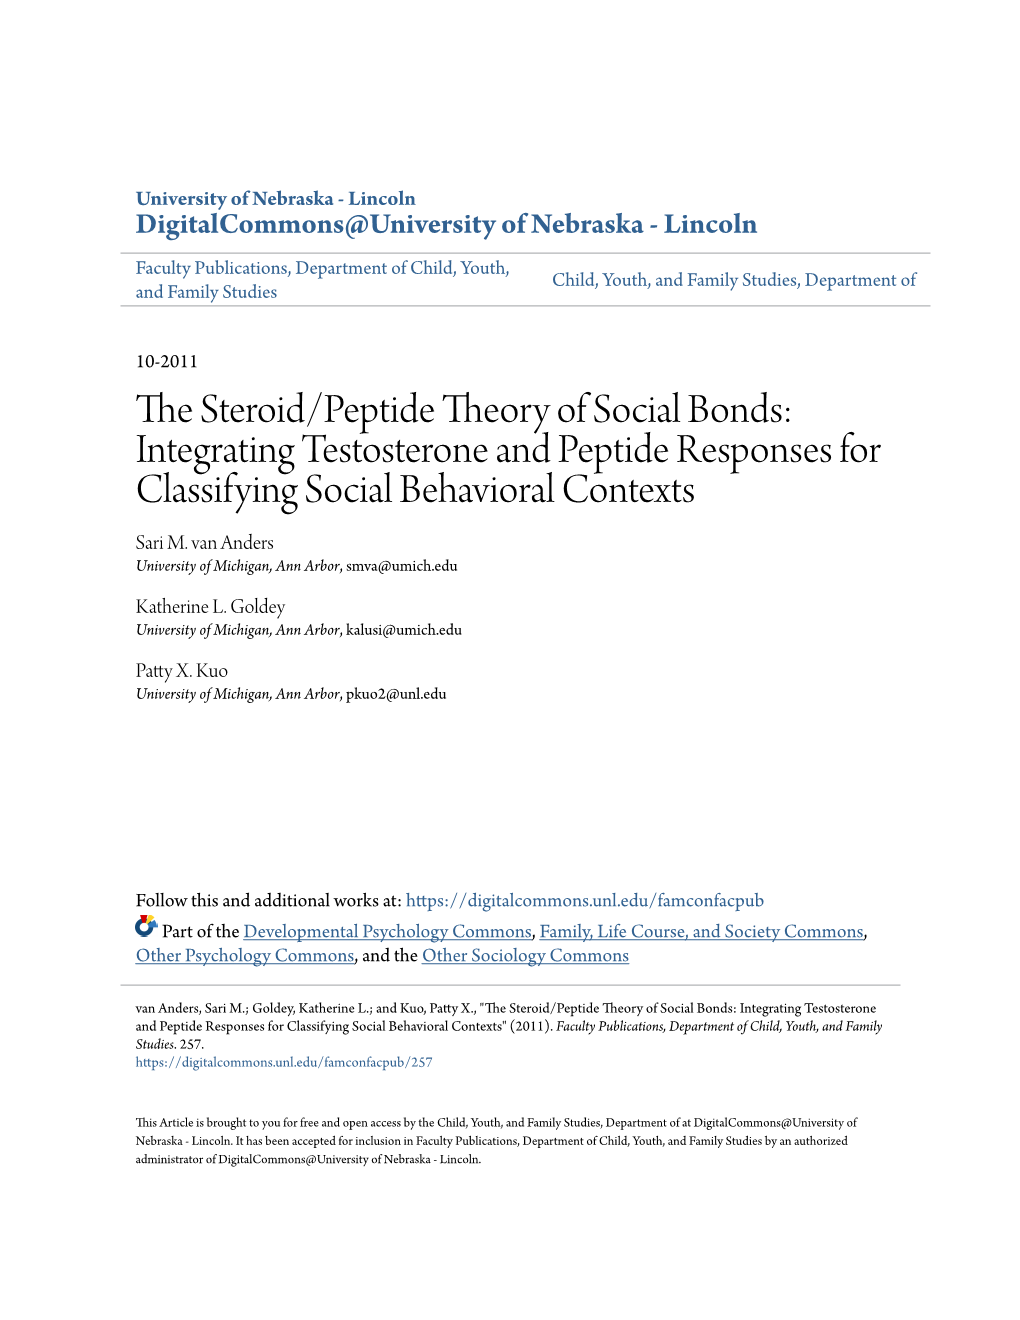 The Steroid/Peptide Theory of Social Bonds: Integrating Testosterone and Peptide Responses for Classifying Social Behavioral Contexts